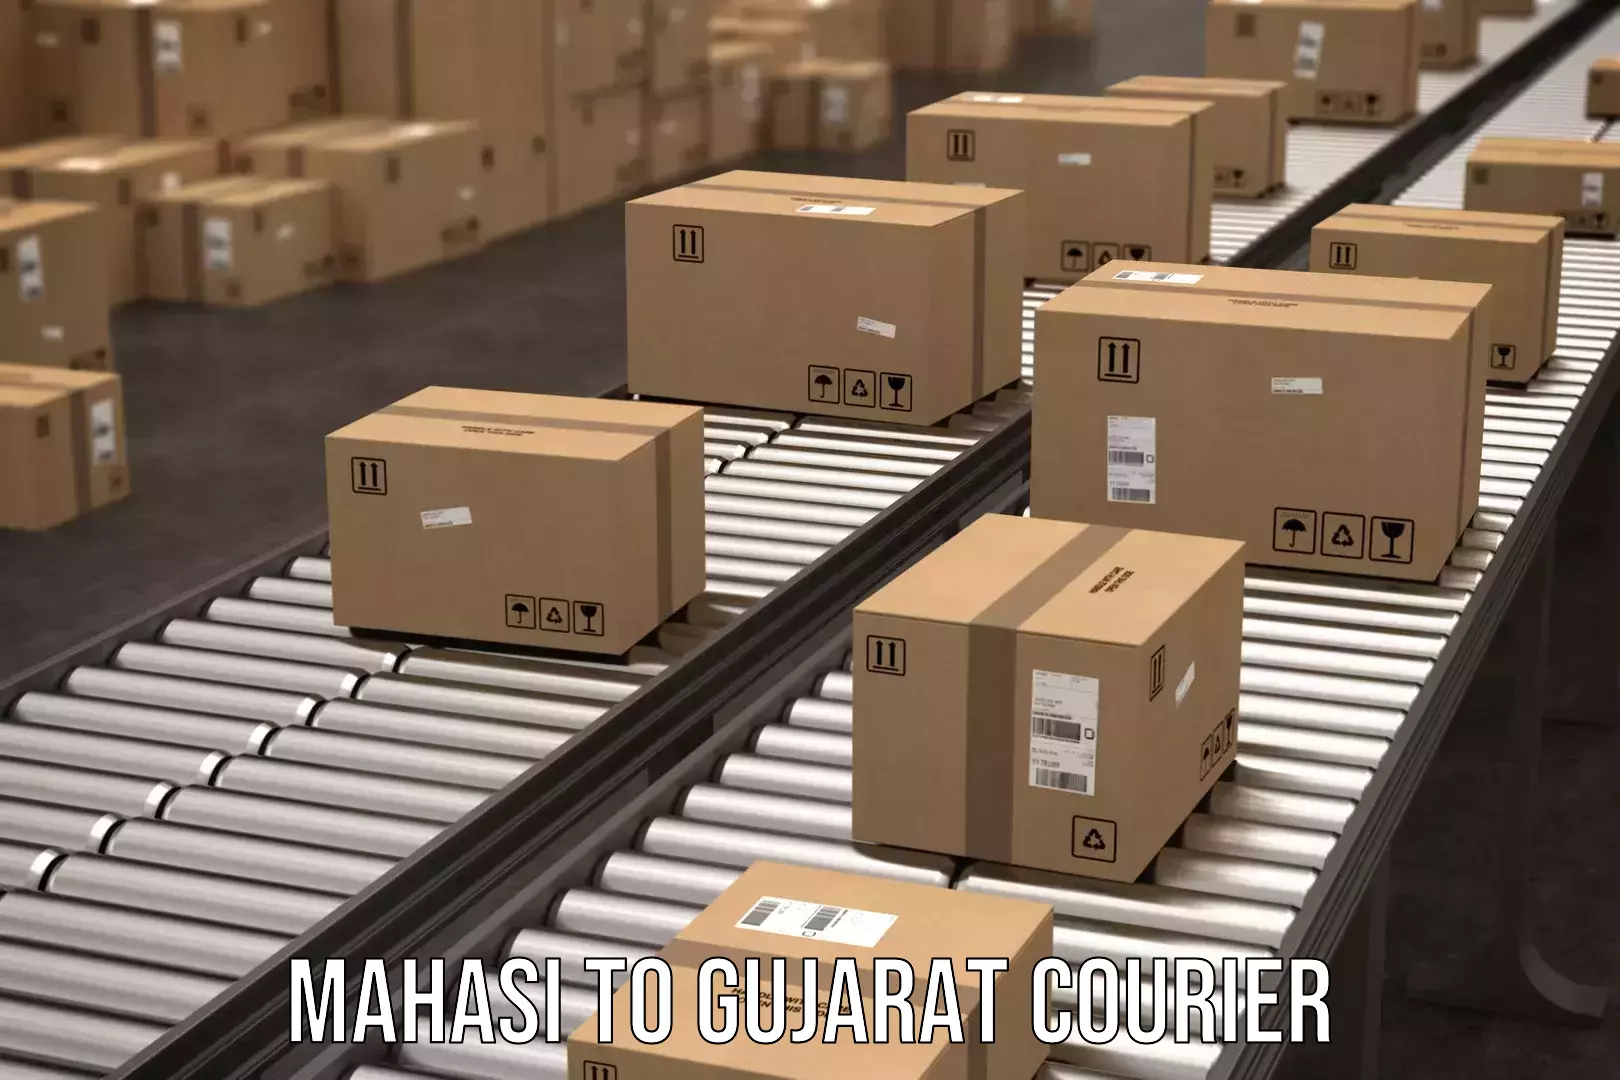 Courier service booking Mahasi to Gujarat